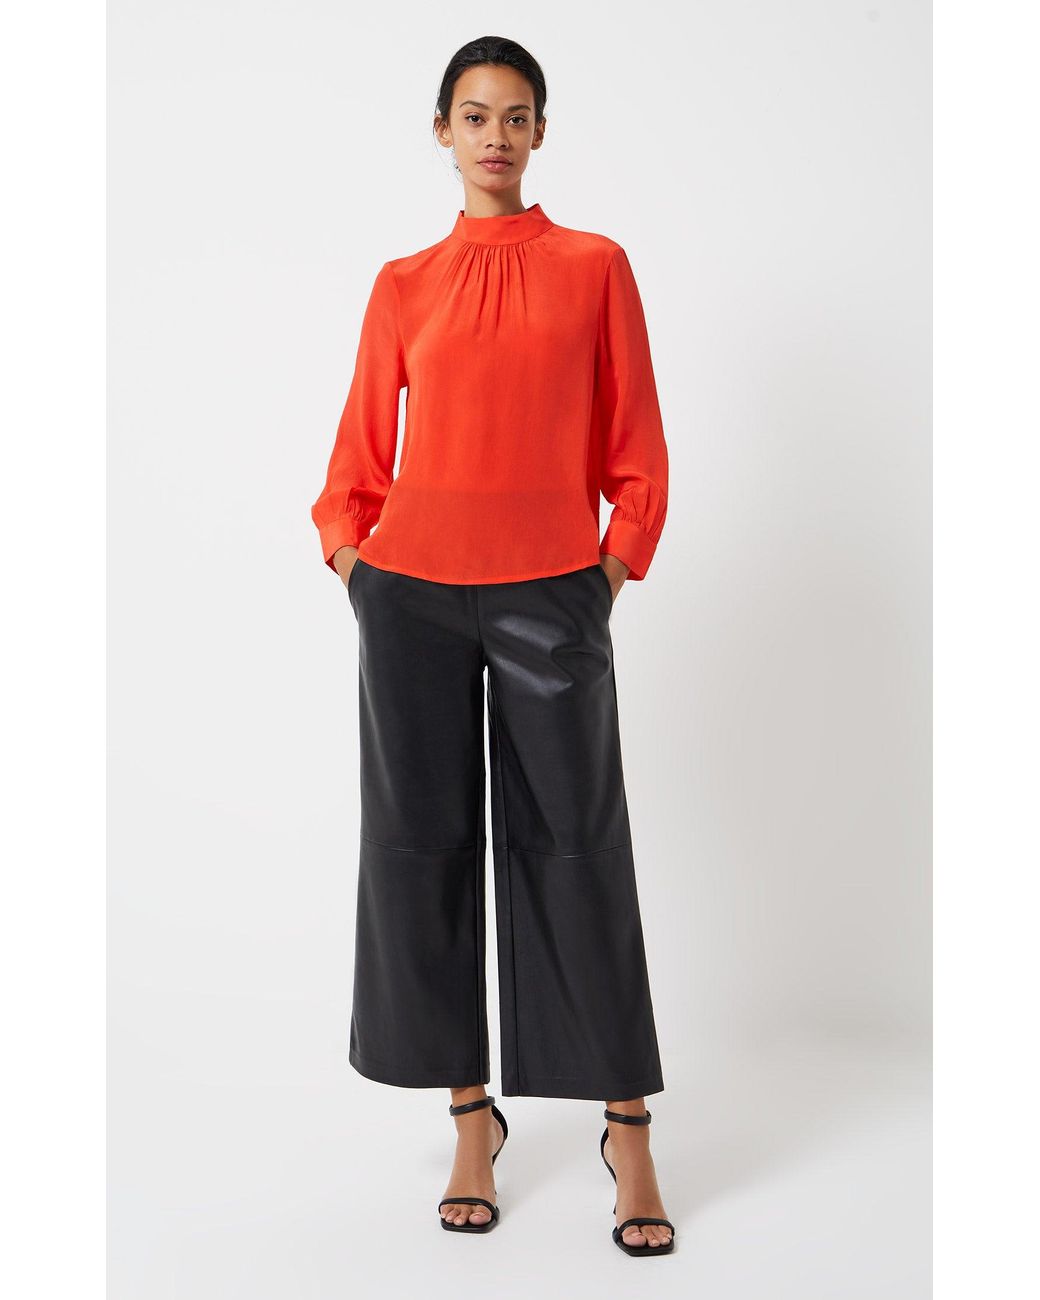 French Connection Etta Recycled Vegan Leather Culottes in Red | Lyst UK